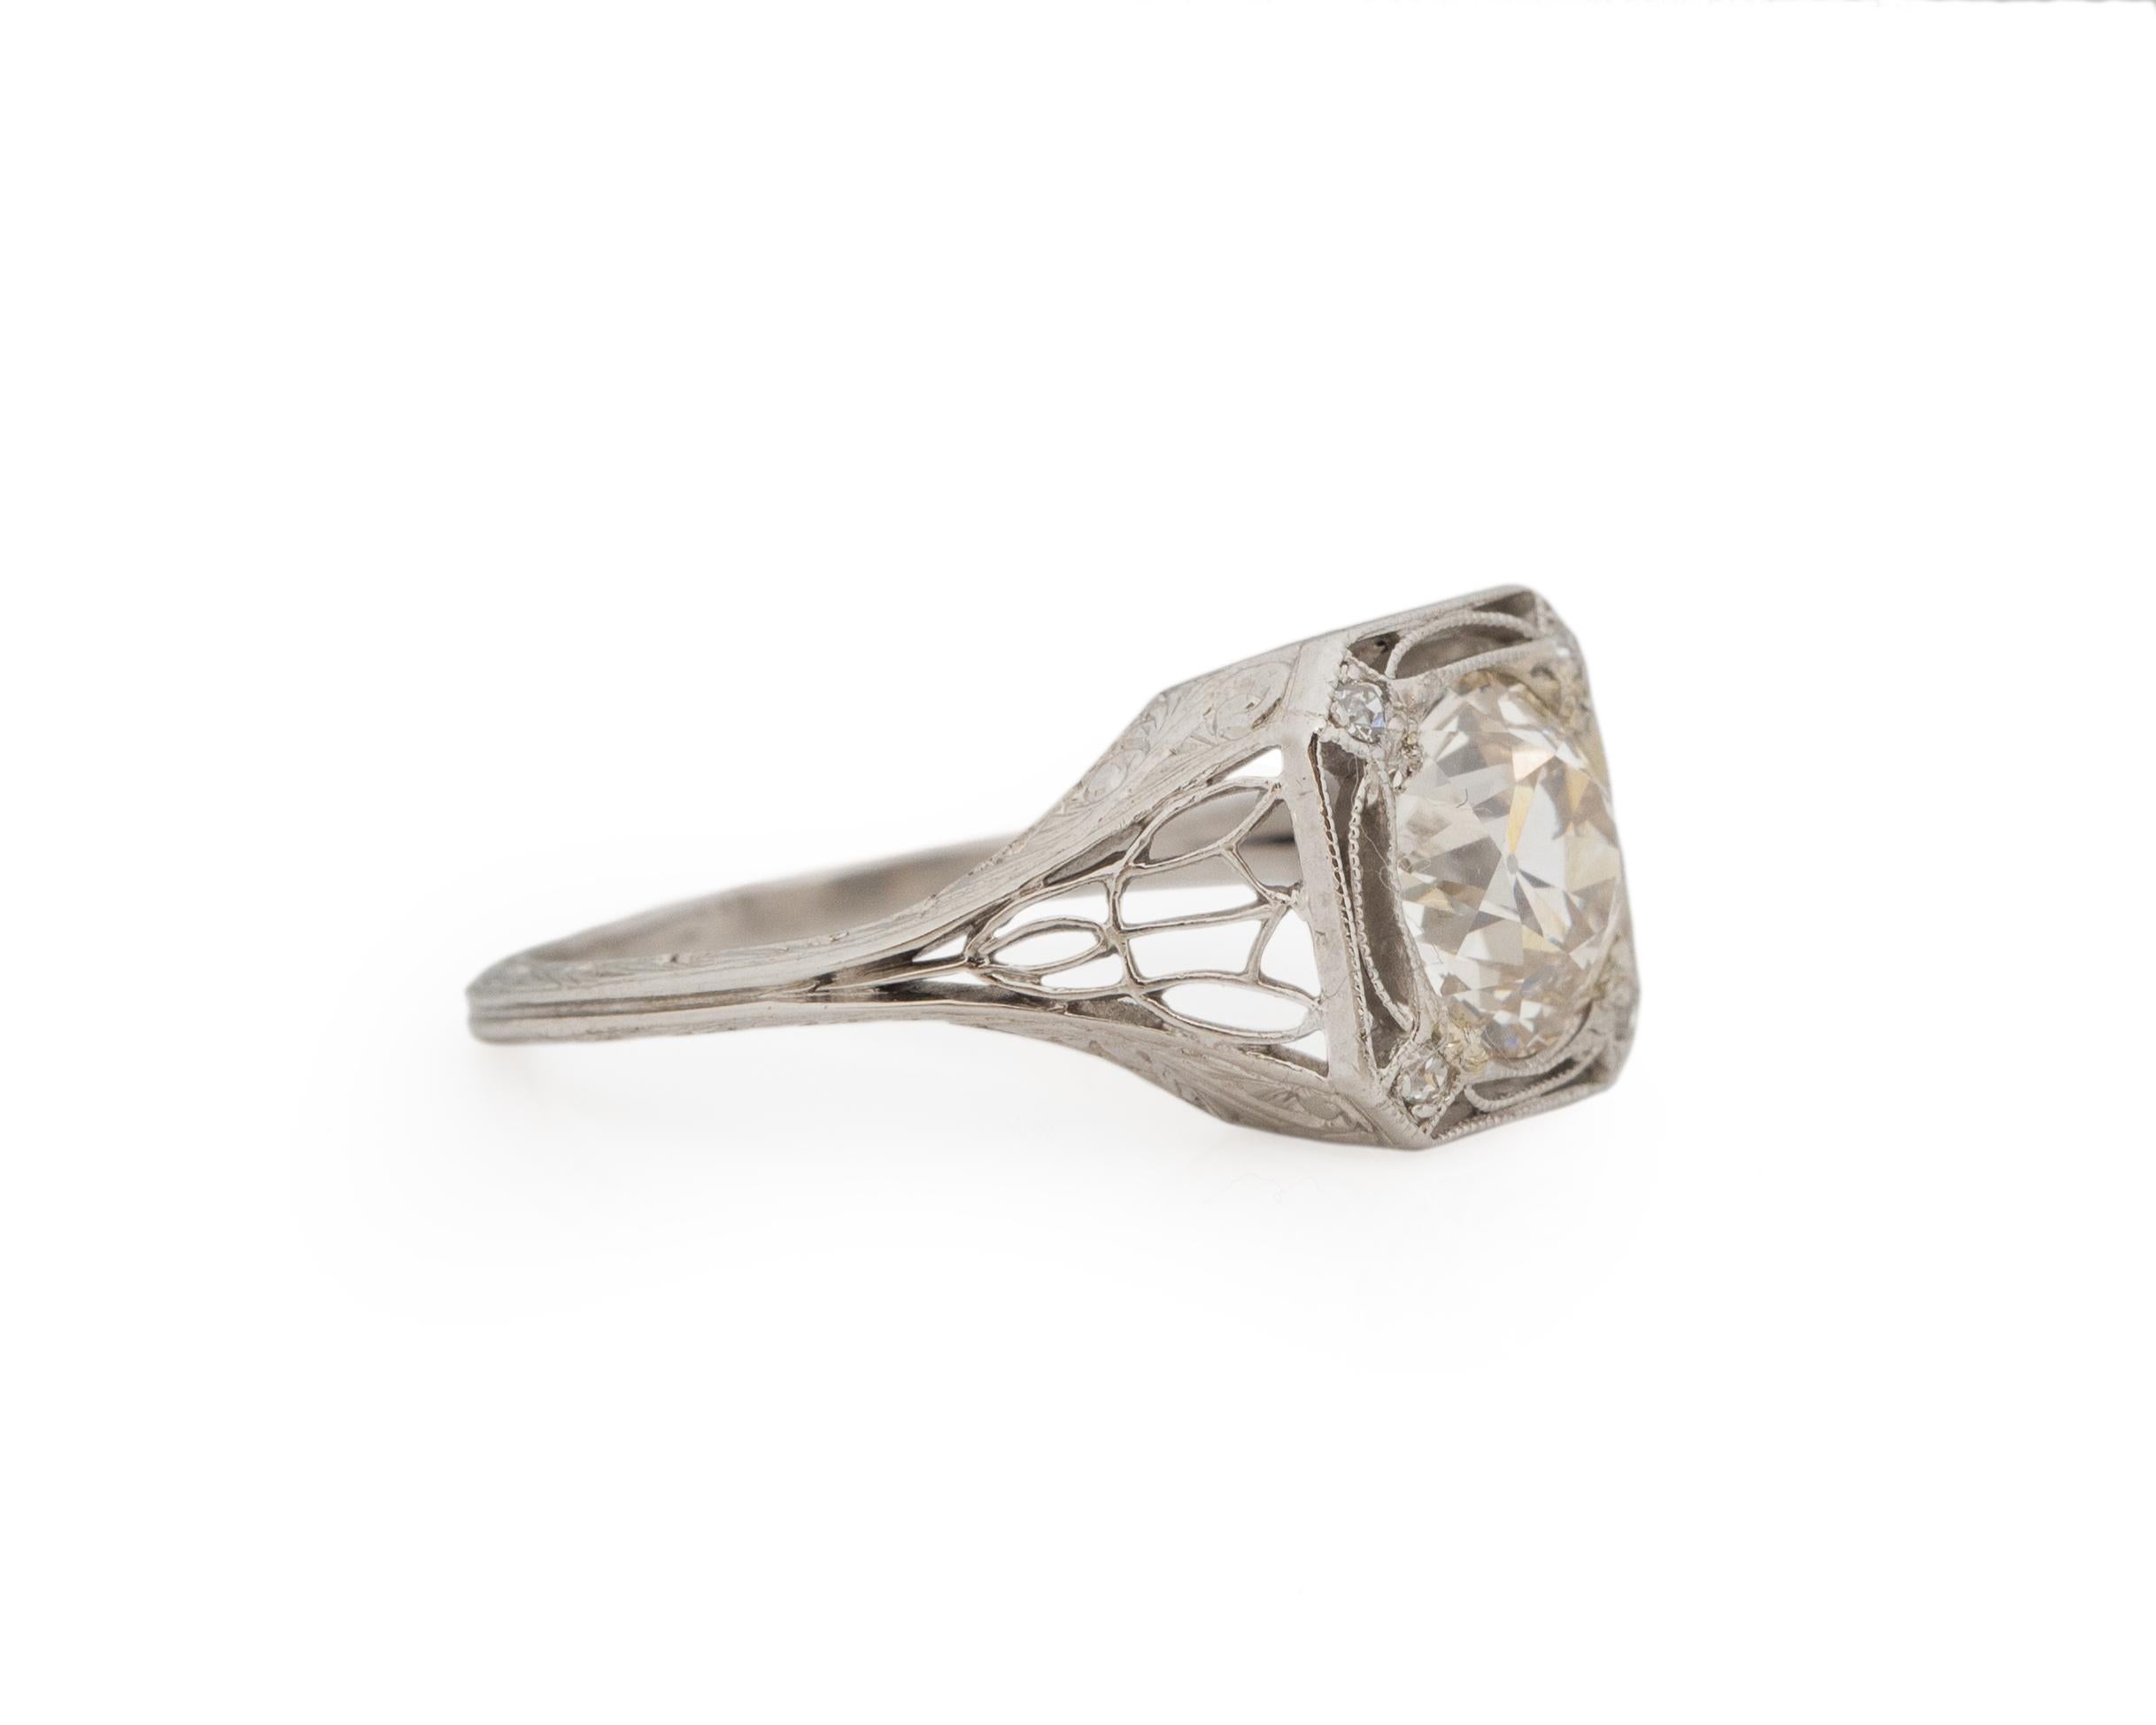 Ring Size: 5.5
Metal Type: Platinum [Hallmarked, and Tested]
Weight: 3.0 grams

Center Diamond Details:
GIA REPORT #: 6224117804
Weight: 1.65ct
Cut: Old European brilliant
Color: M
Clarity: VS2
Measurements: 7.40mmx 7.23mm x 4.83mm

Side Stone